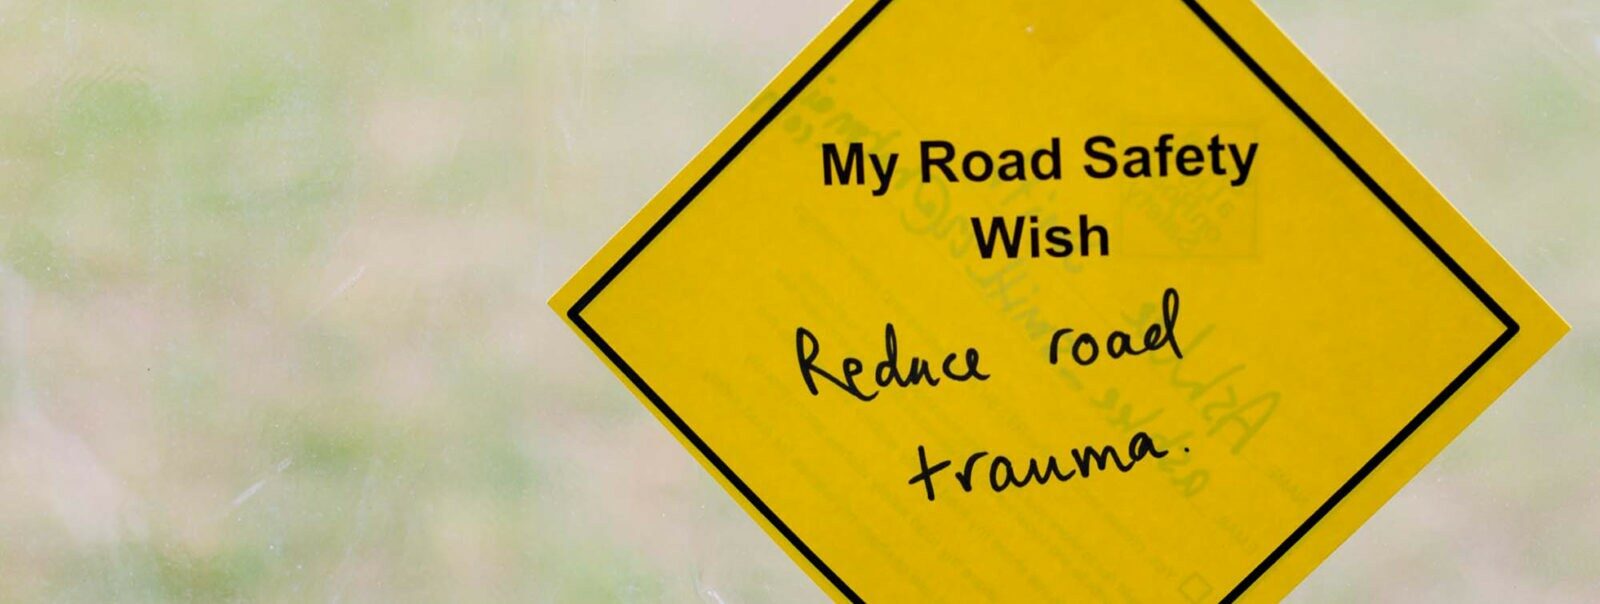 My road safety wish